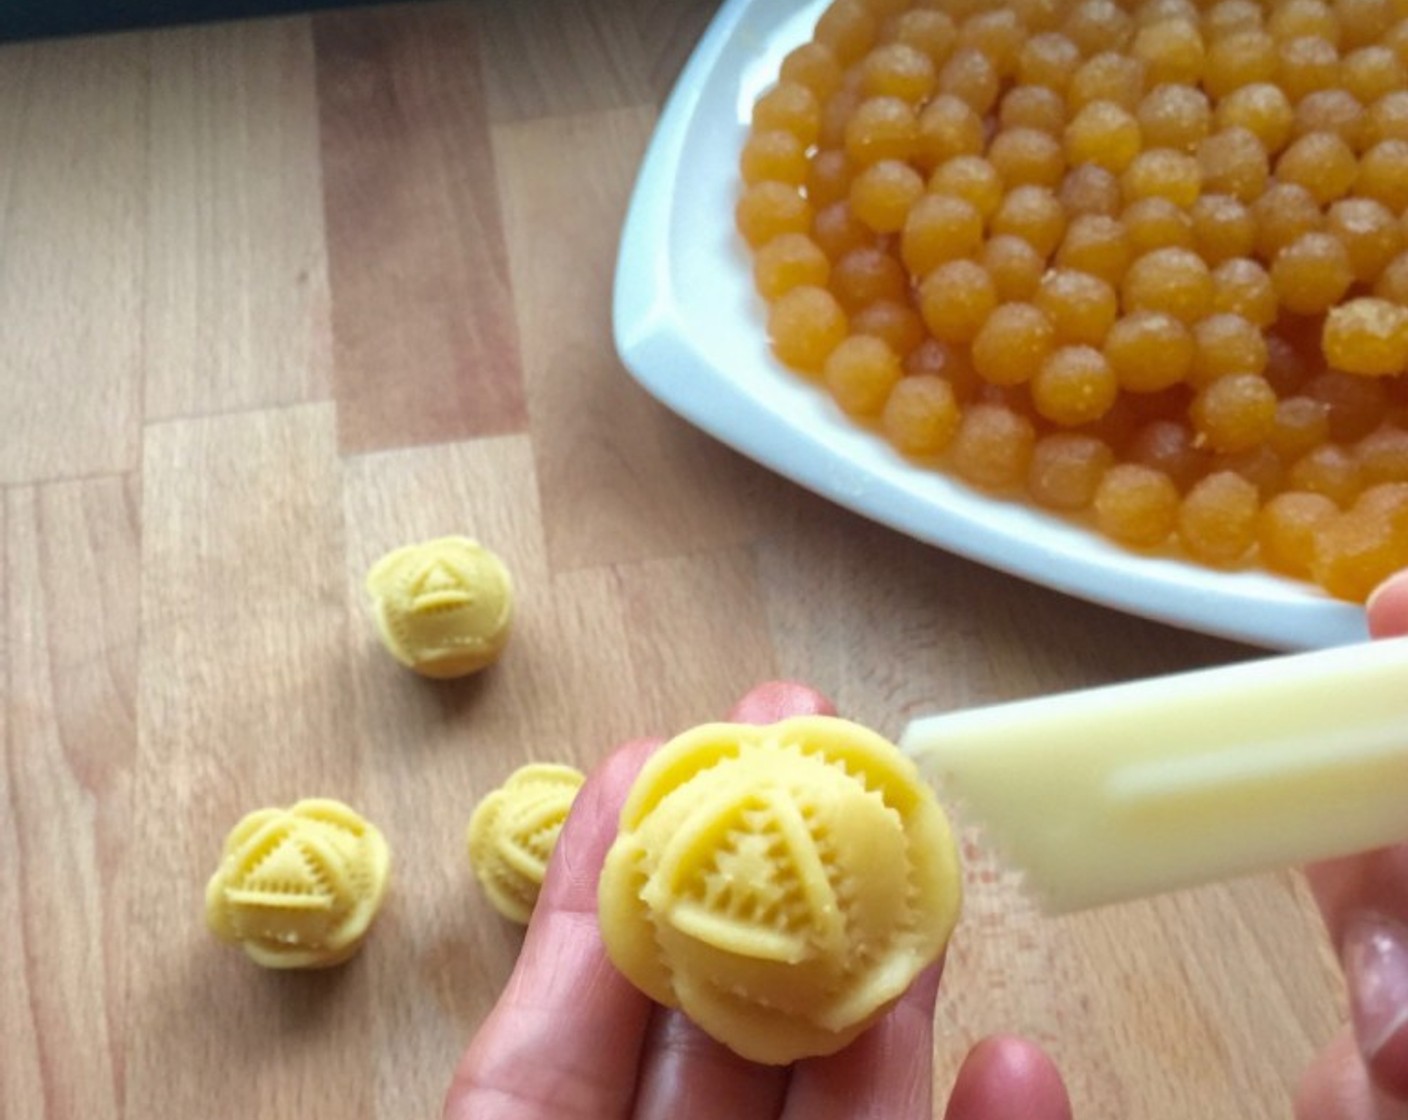 step 16 Using a plastic crimper, crimp the rolled pineapple tart into a rose shape.